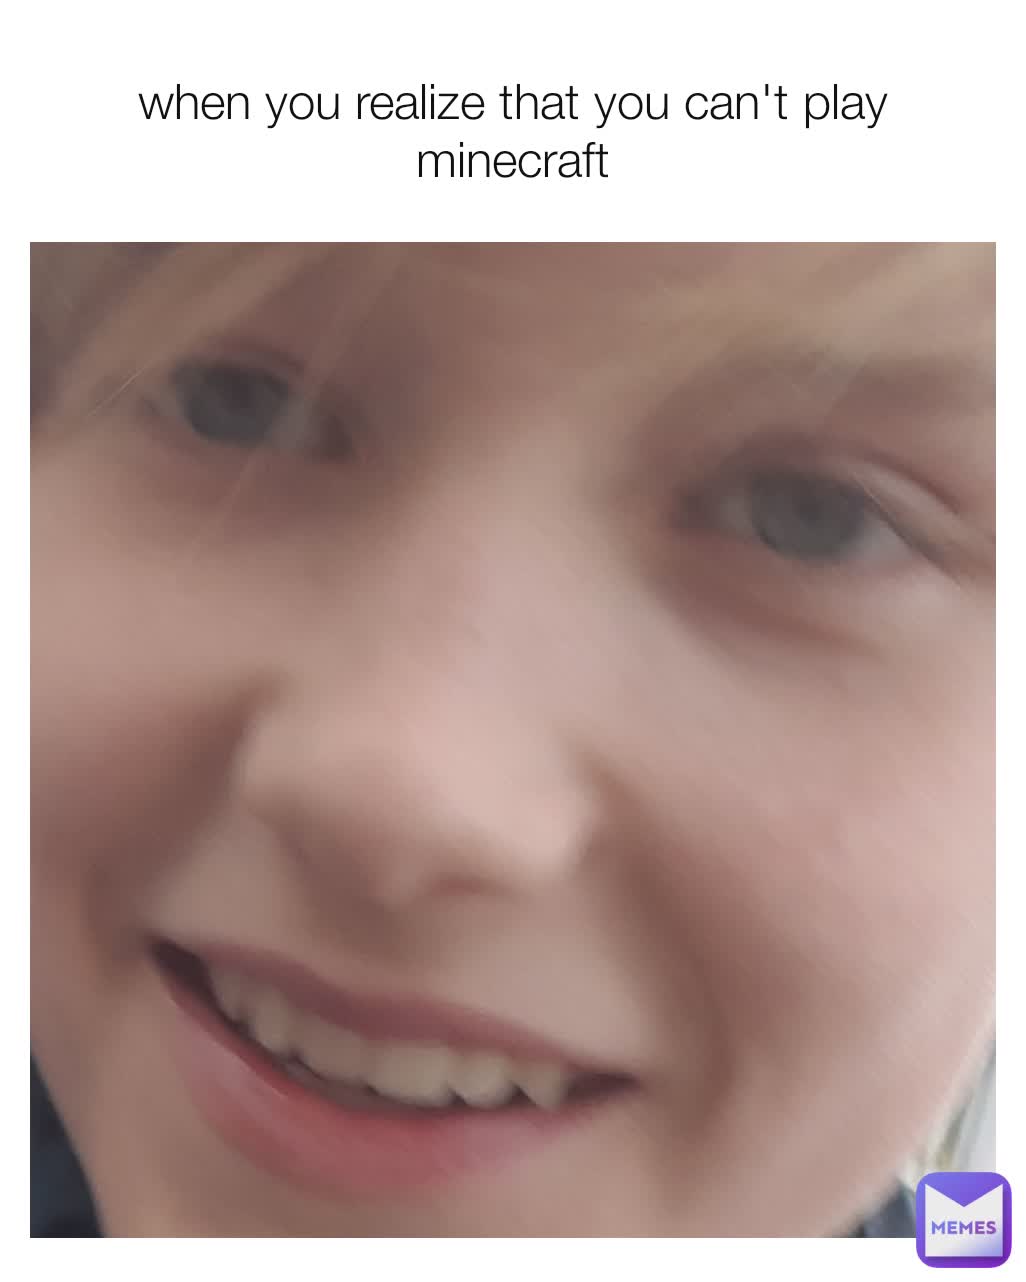 when you realize that you can't play minecraft